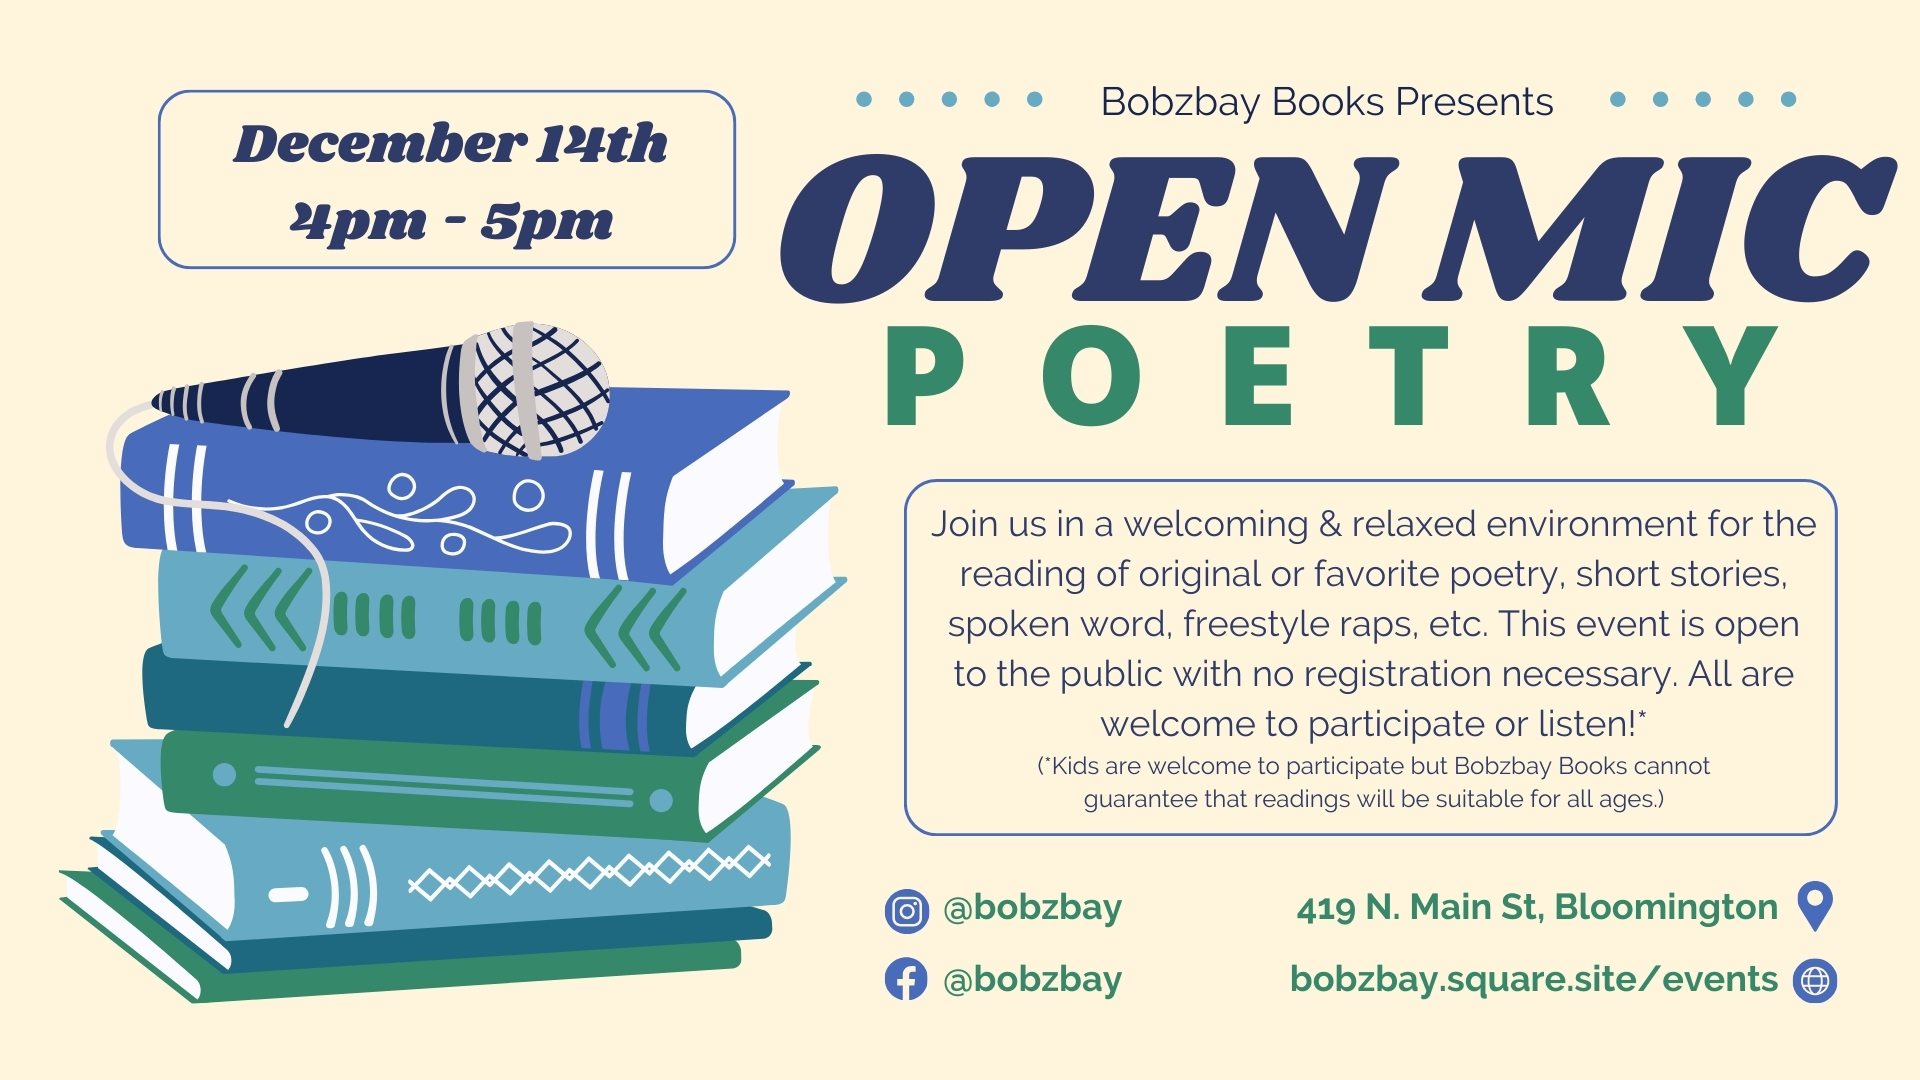 December Open Mic Poetry at Bobzbay Books